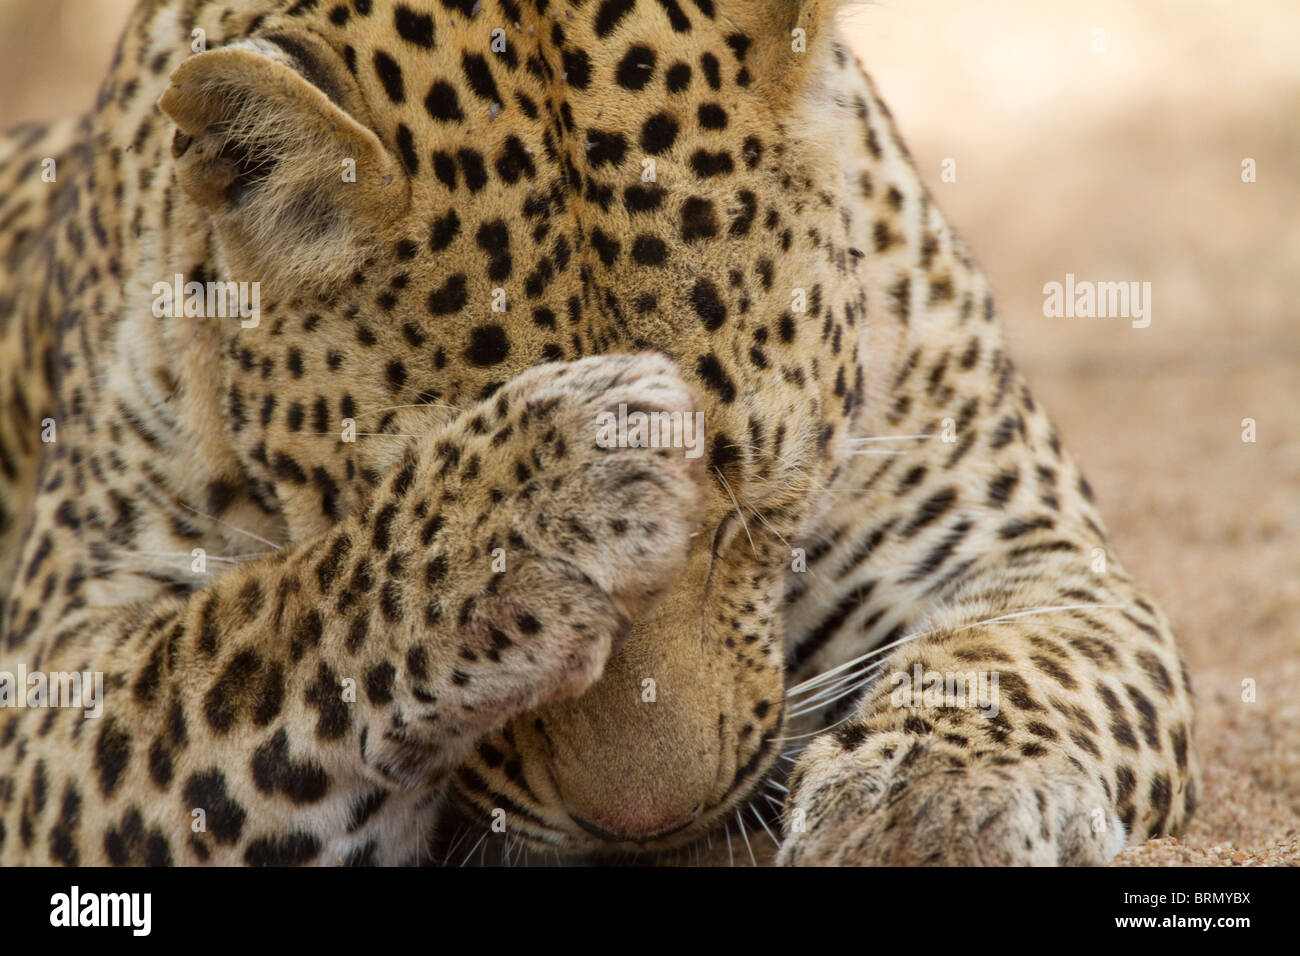 Tight portrait of a male leopard grooming with its paw in front of its face. Stock Photo